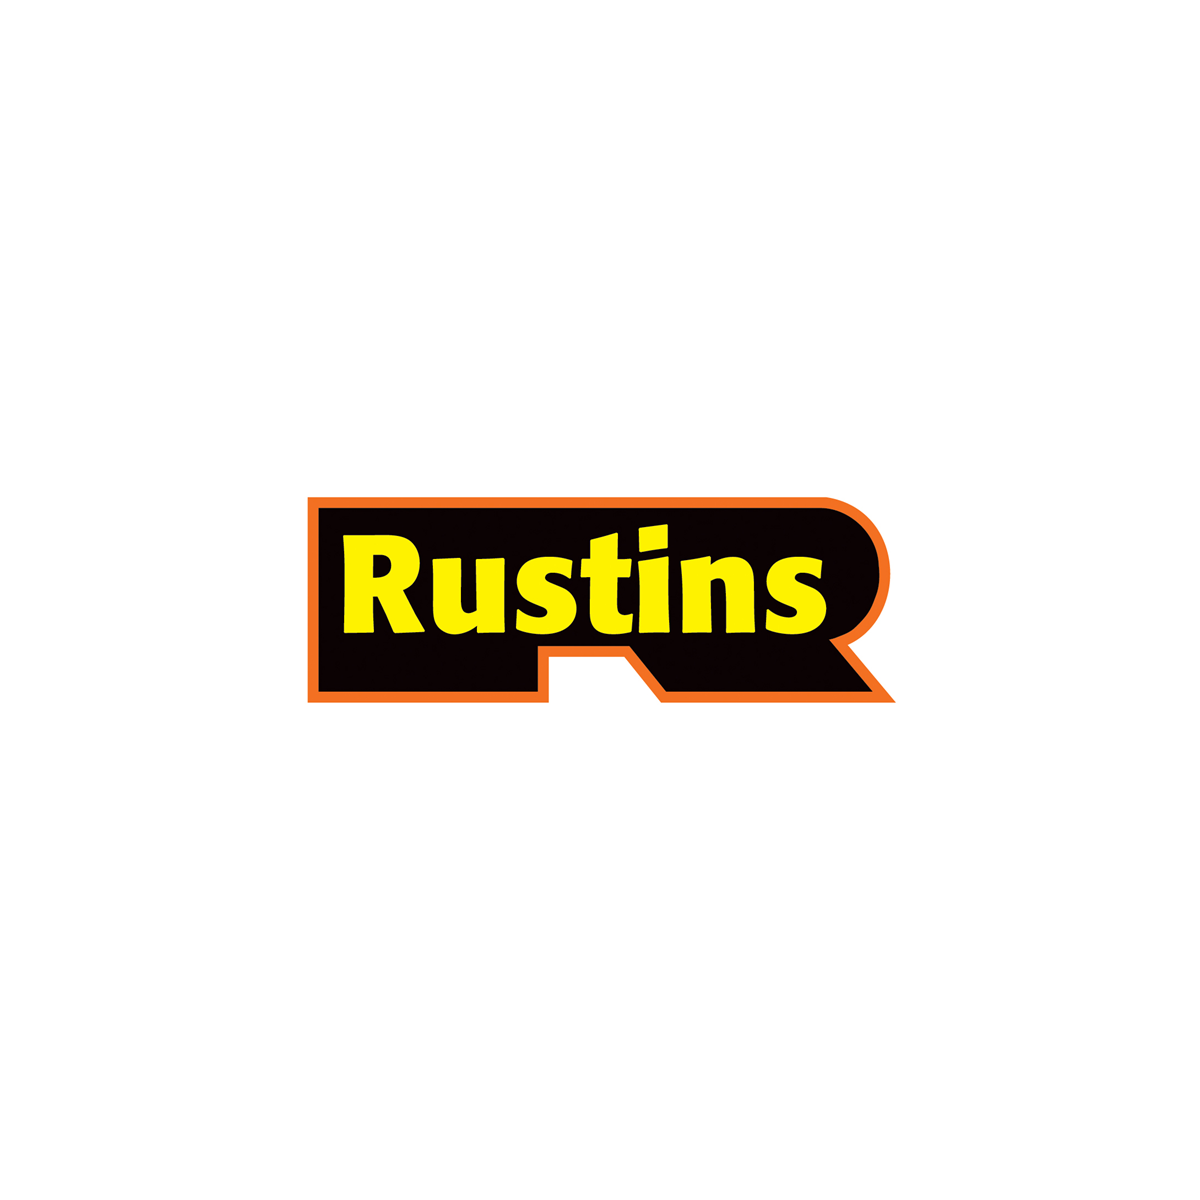 Where to Buy Rustins Scratch Covers